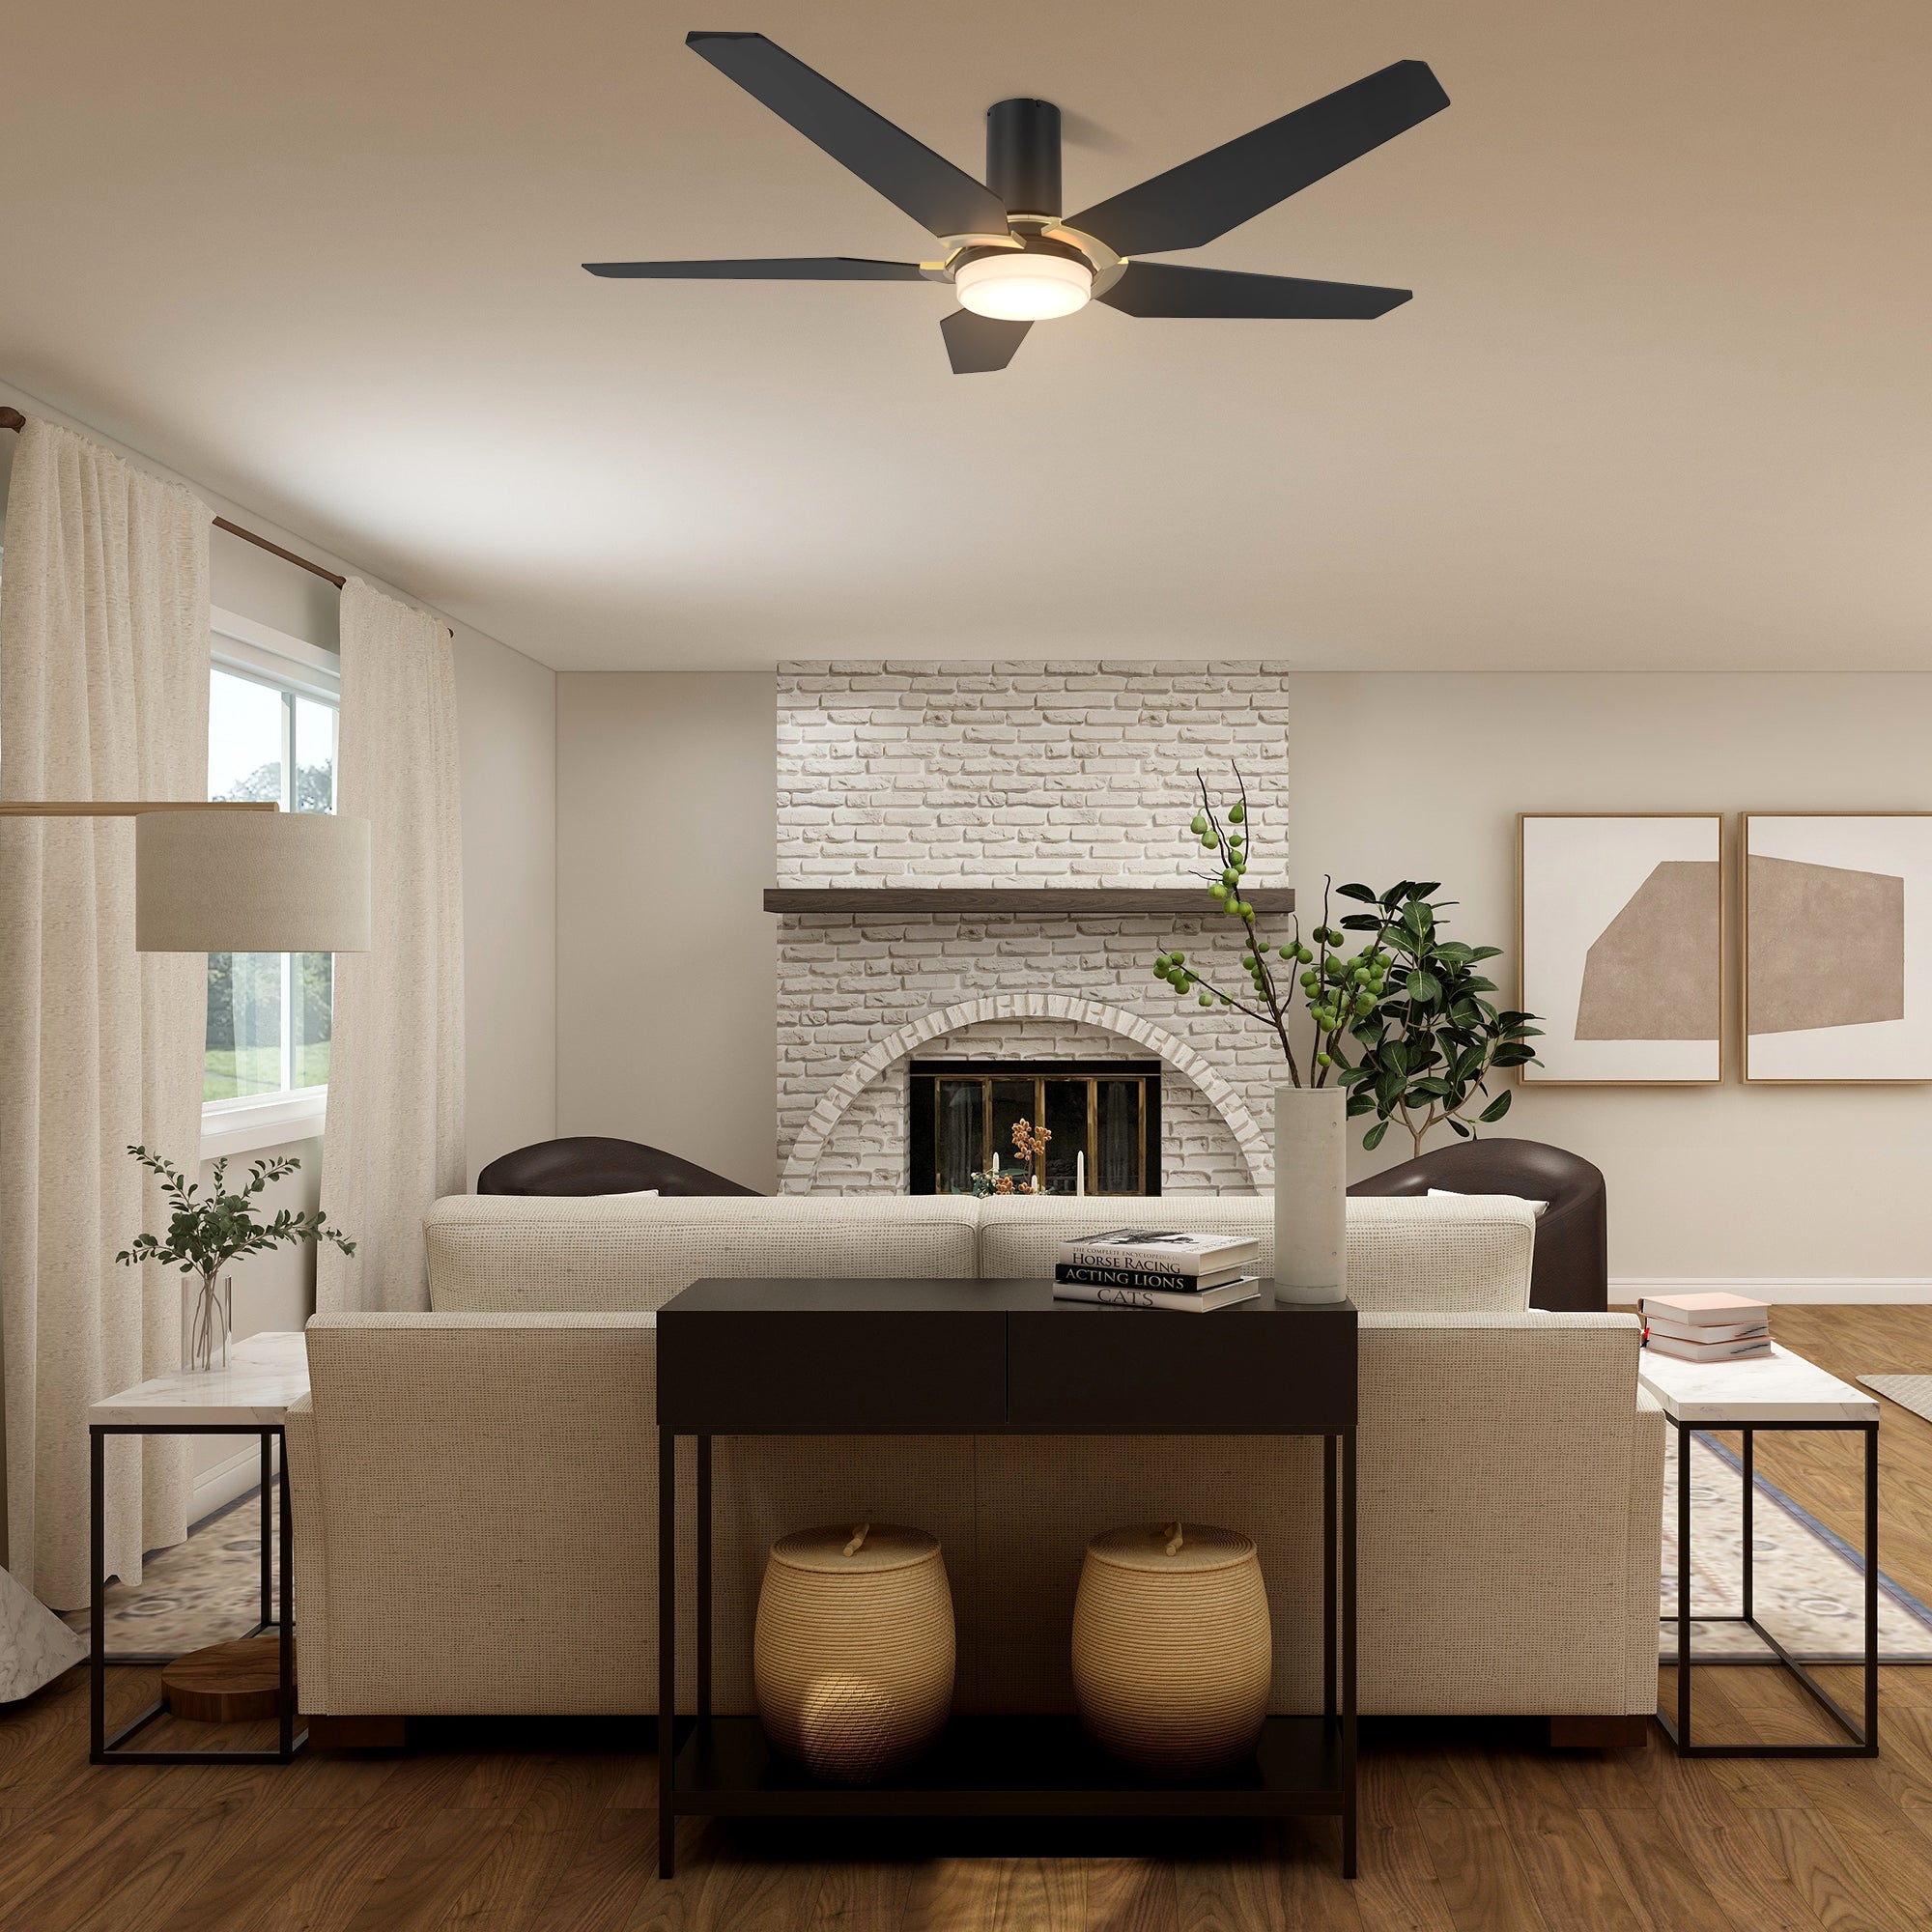 This Voyager 52'' smart ceiling fan keeps your space cool, bright, and stylish. It is a soft modern masterpiece perfect for your large indoor living spaces. This Wifi smart ceiling fan is a simplicity designing with Black finish, use elegant Plywood blades, Glass shade and has an integrated 4000K LED daylight. The fan features Remote control, Wi-Fi apps, Siri Shortcut and Voice control technology (compatible with Amazon Alexa and Google Home Assistant ) to set fan preferences.#color_Black&Gold